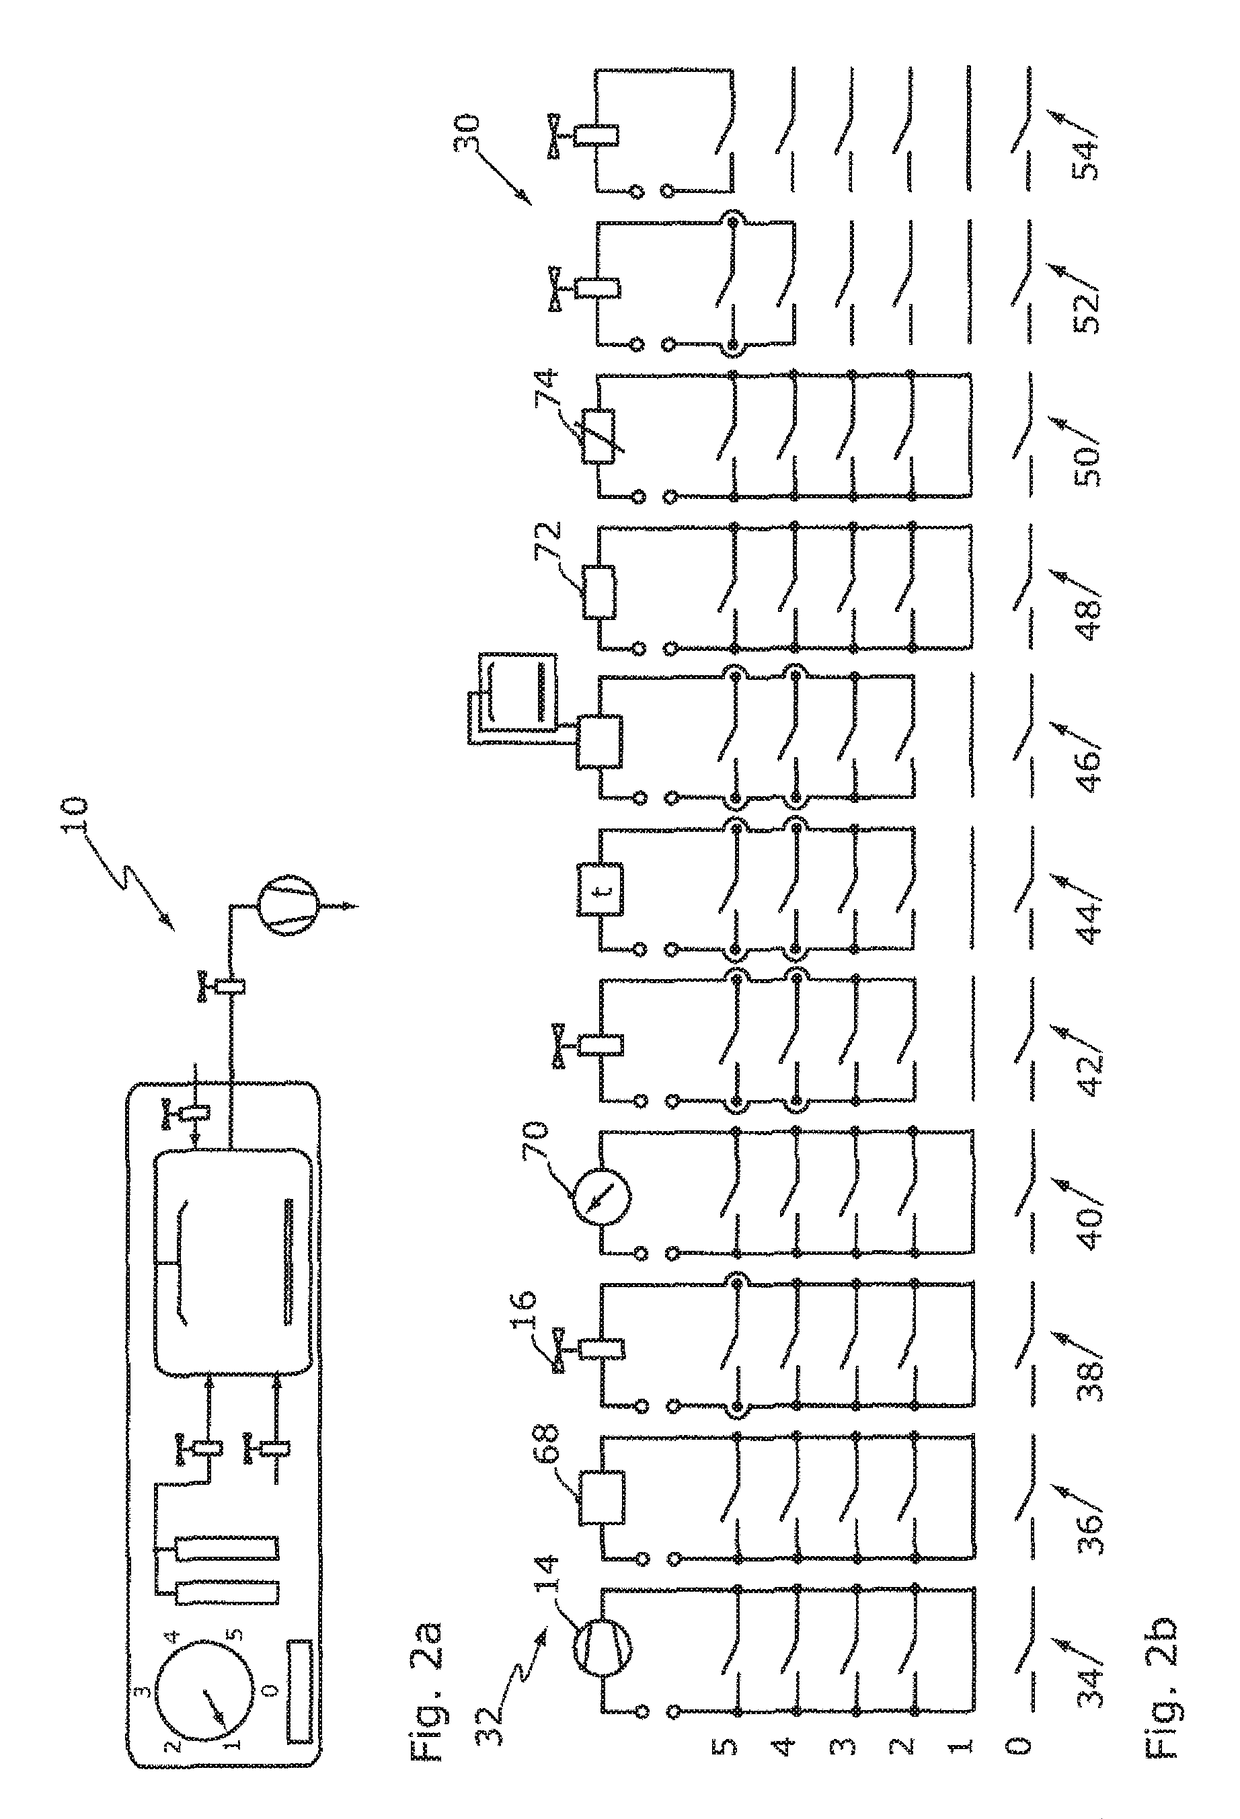 Low-pressure plasma system with sequential control process